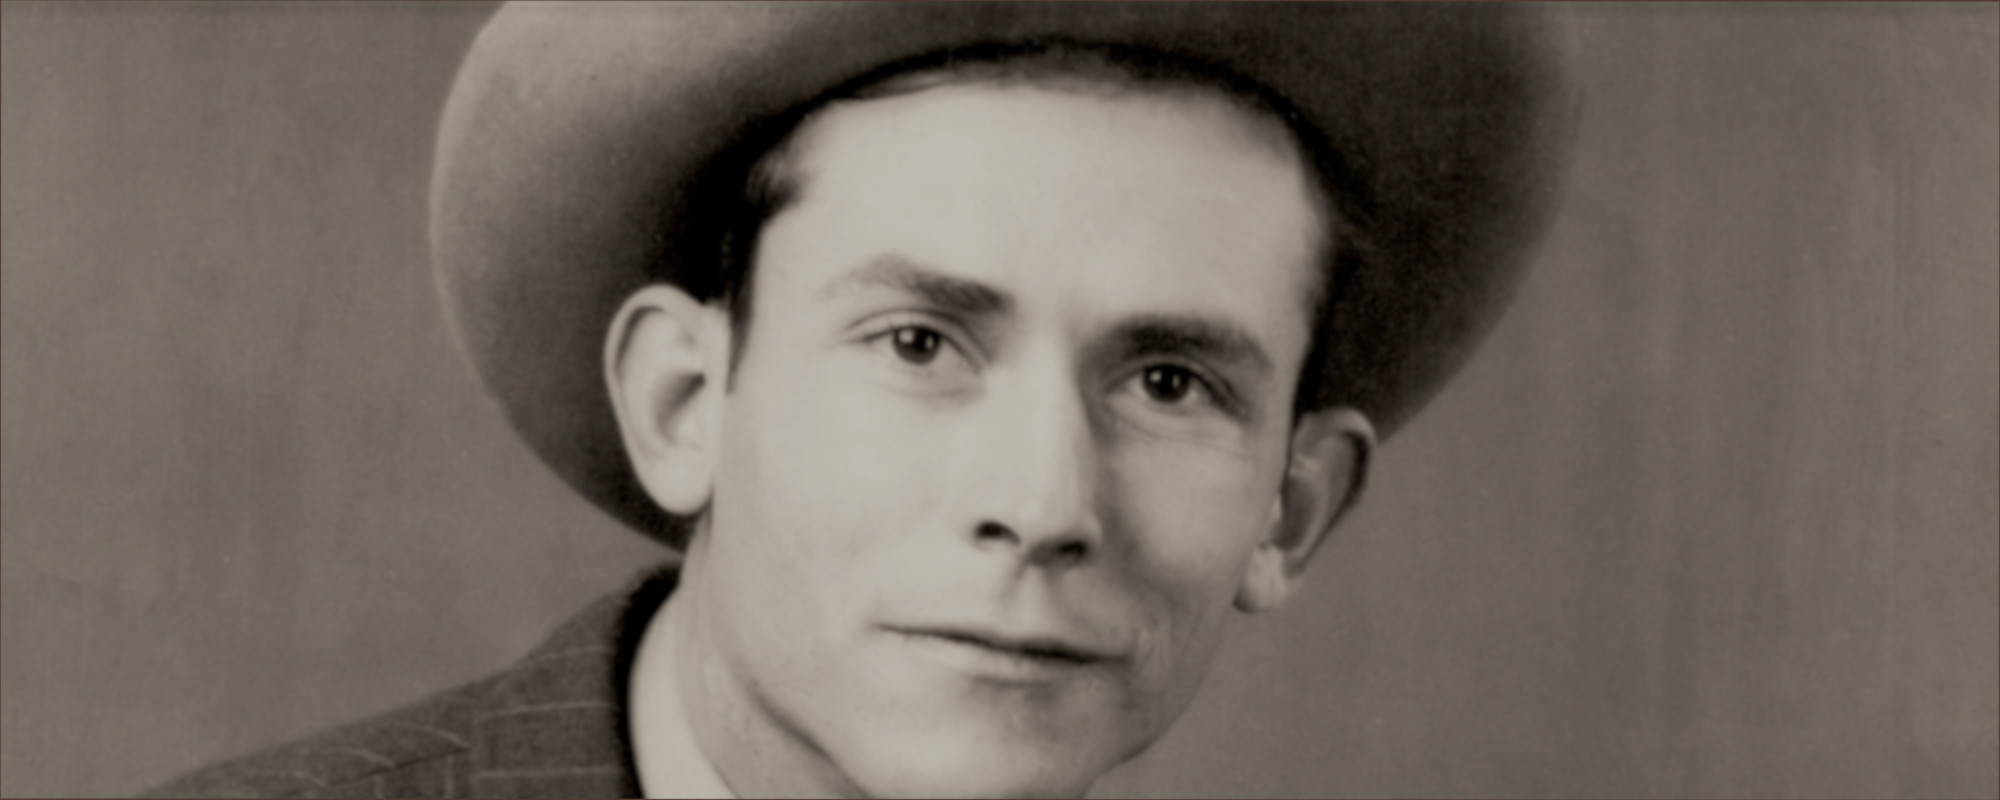 The 16 Best Hank Williams Quotes: “To Sing Like a Hillbilly, You Had to Have Lived Like a Hillbilly”